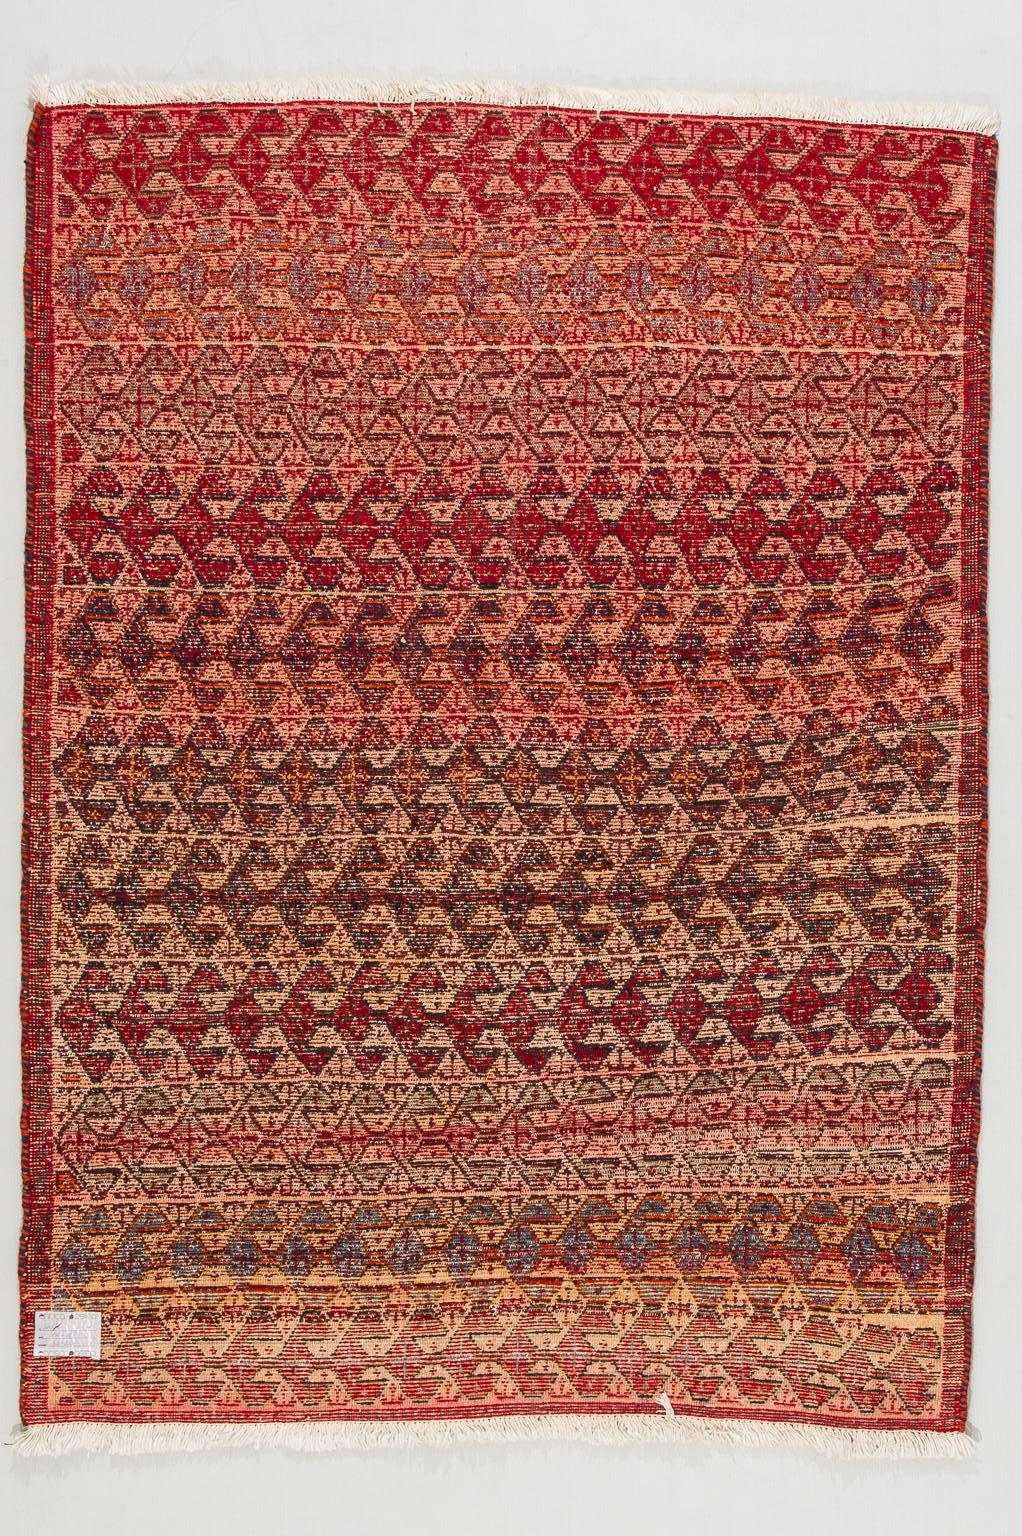 nr. 1275 -  Pleasant cheerful in colors little carpet from the mountains of Kurdistan, knotted by a woman in some village.
The wools are soft and invite to sit on the carpet: it is their sofa.
It's an easily settable measure, with a good price.